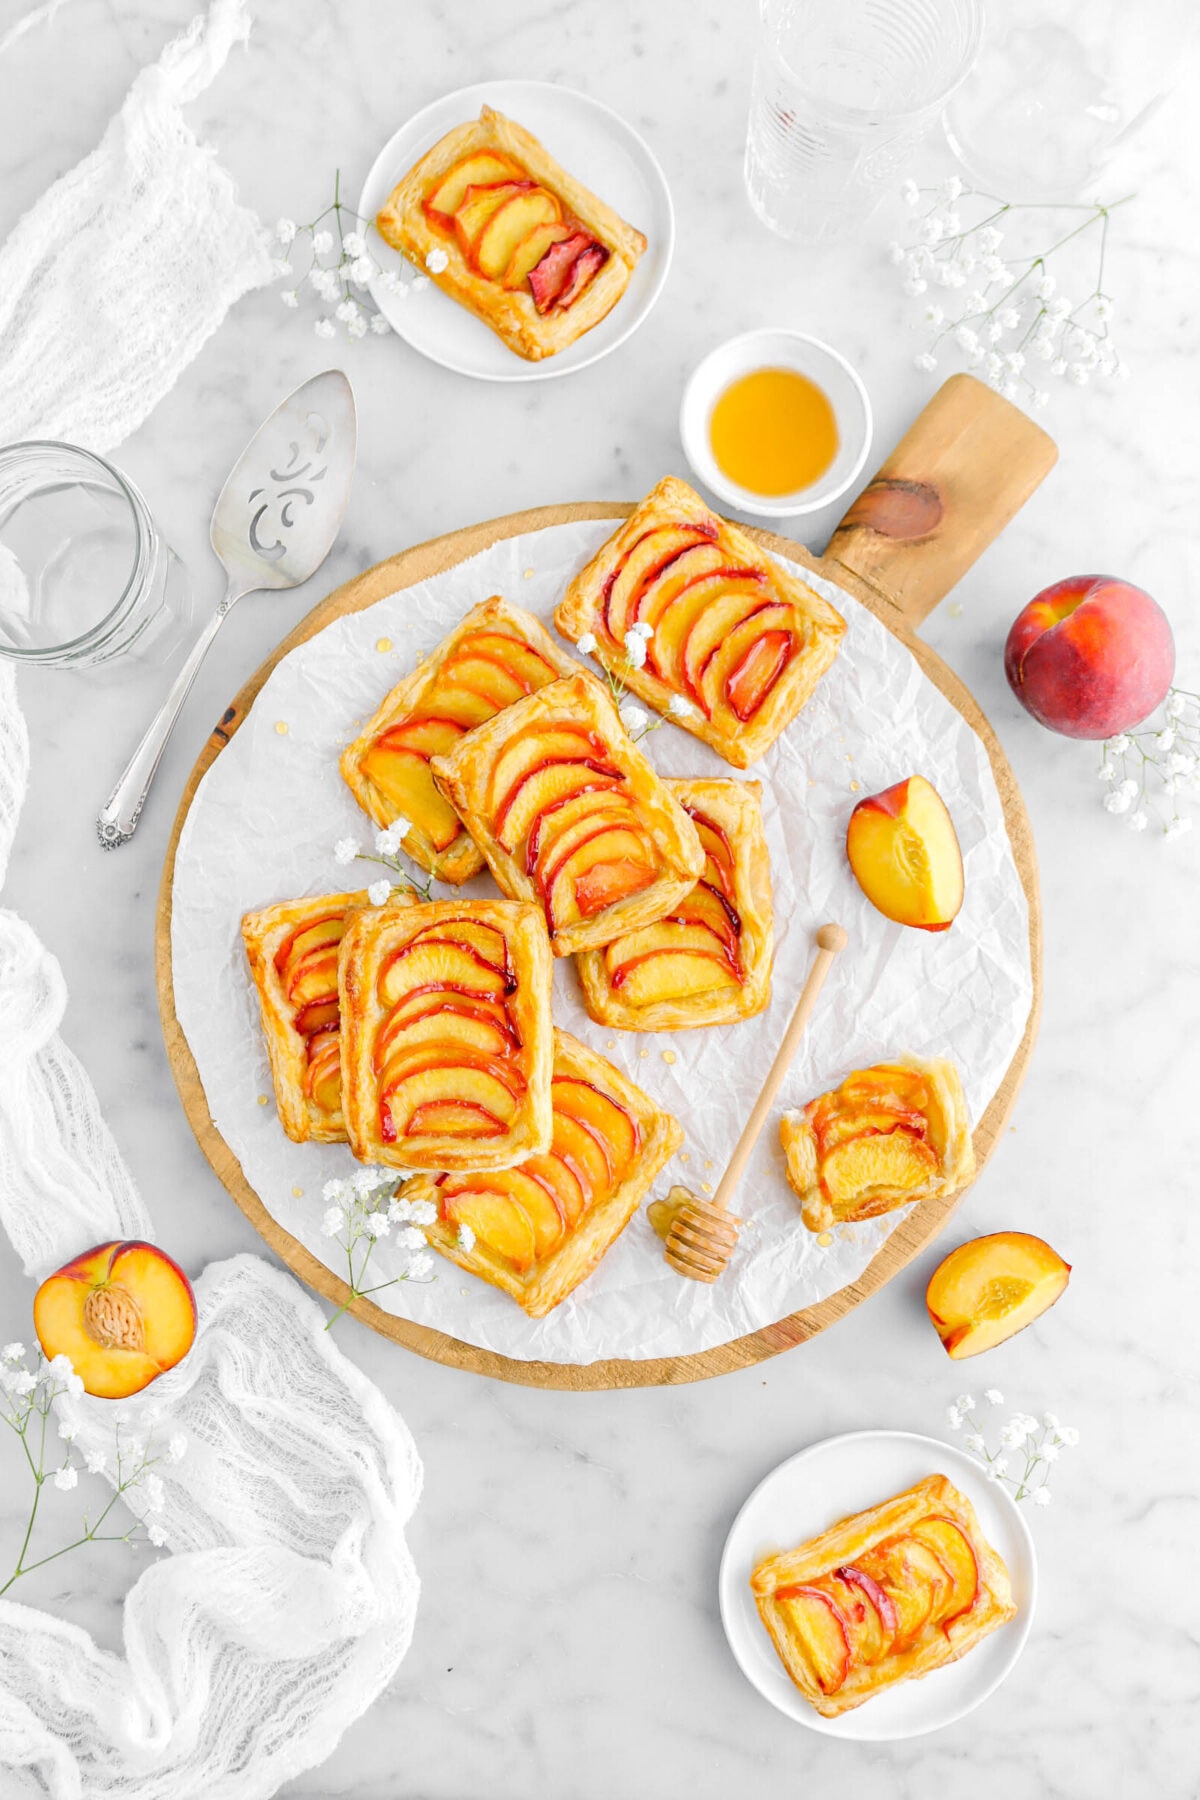 overhead shot of 7 and a half peach tarts on round wood wood board lined with parchment paper, a quarter of a peach, a honey dipper, and white flowers tucked around tarts, with two more tarts on white plates around board, a white cheese cloth, more peaches, a cake knife, and an empty jar on marble surface.